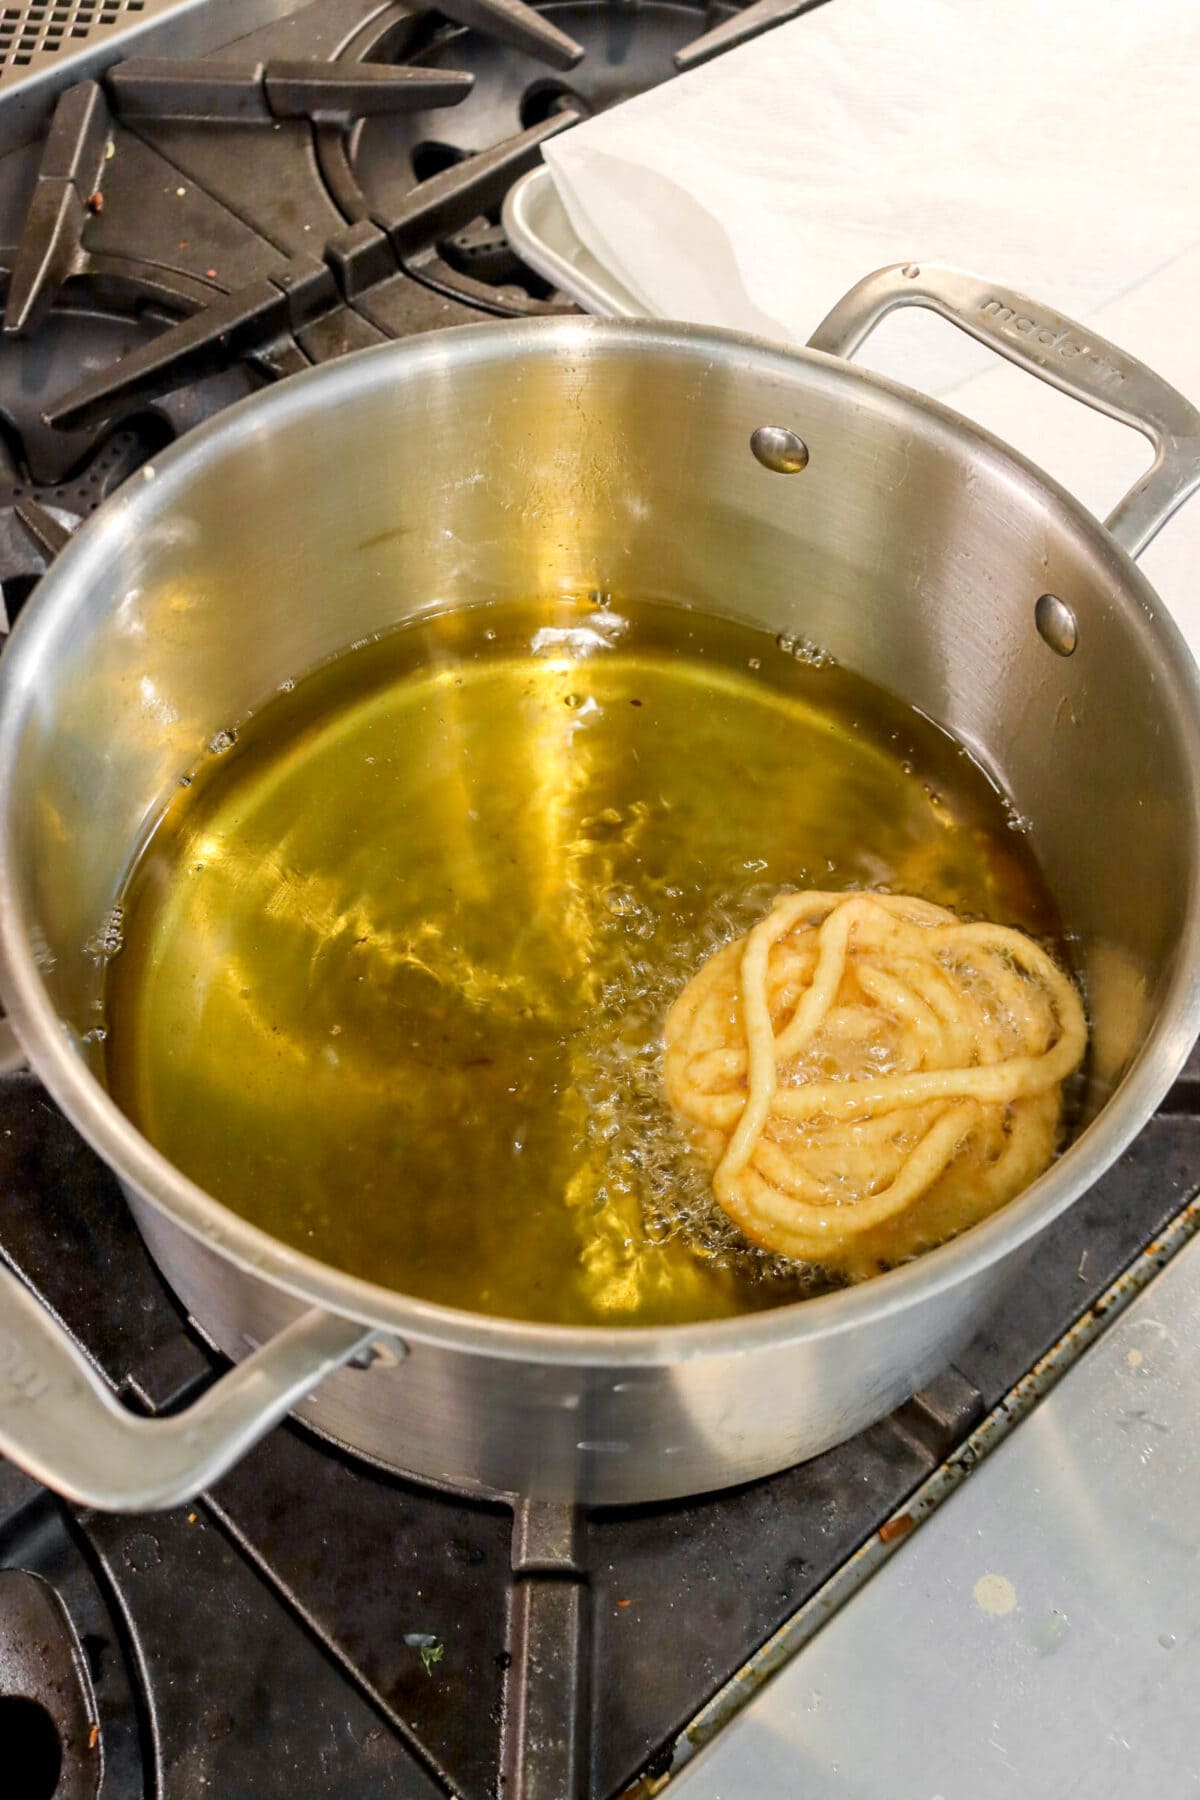 funnel cake being fried in large pot